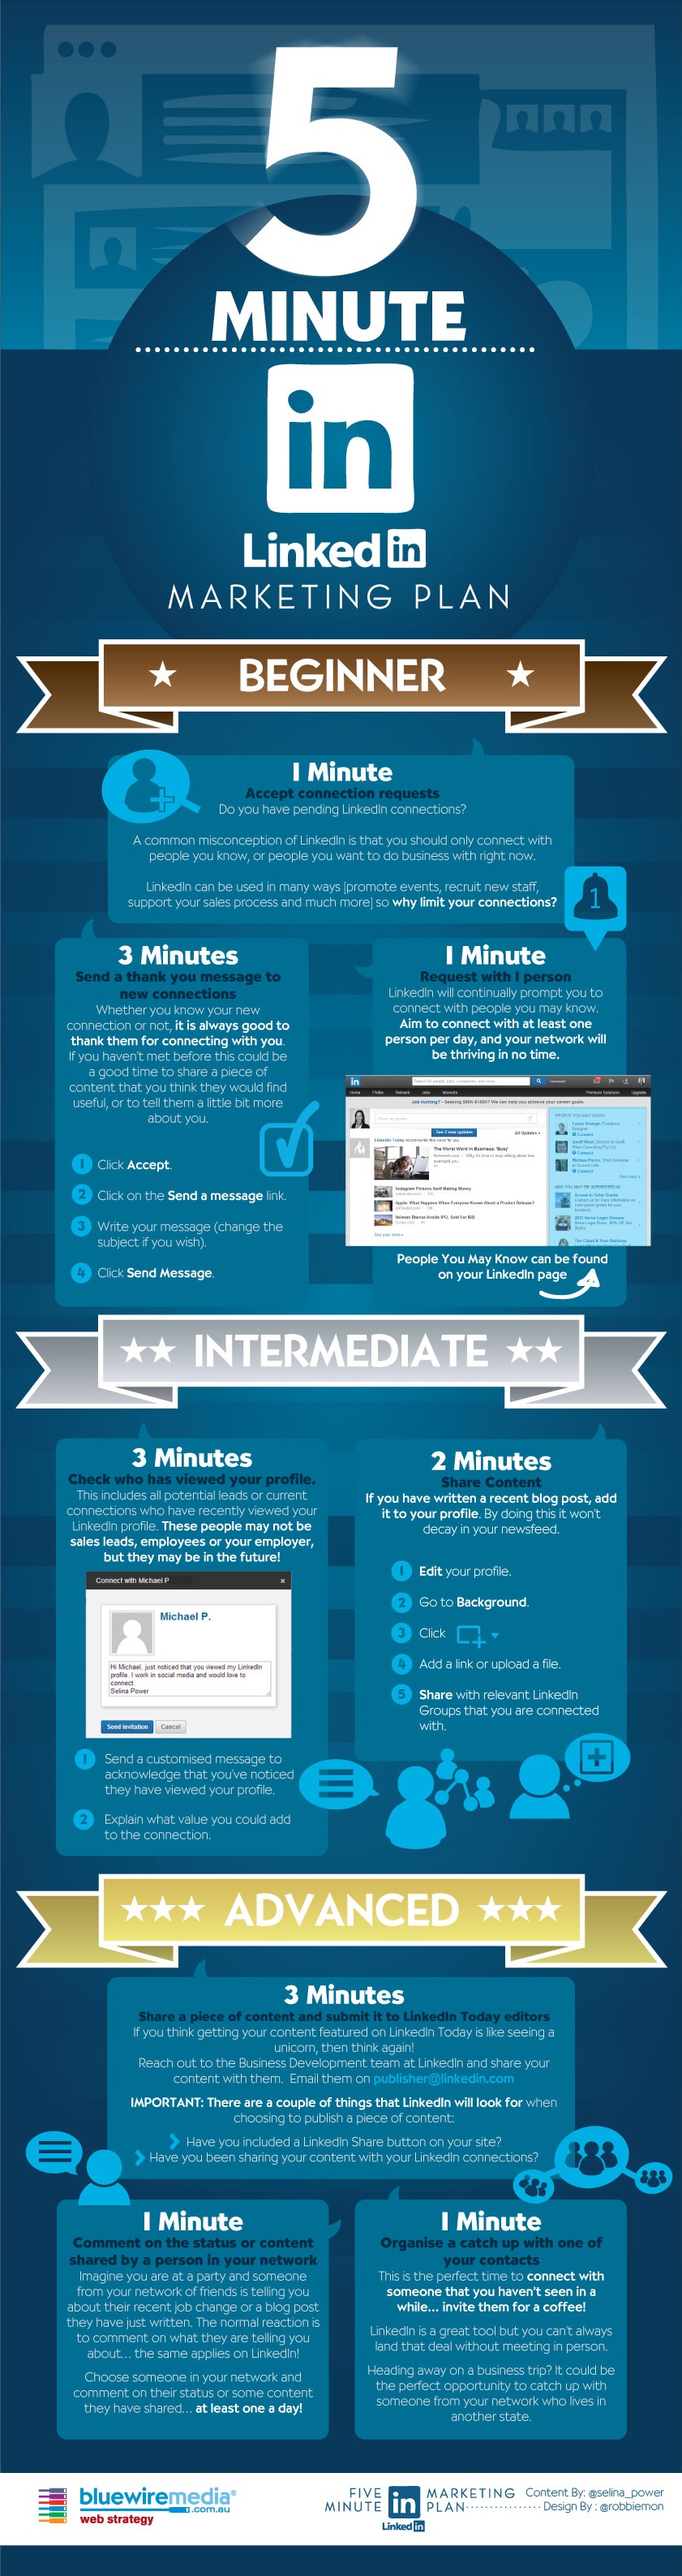 5 Minute Linkedin Mangement Plan for Users of All Levels [Infographic]